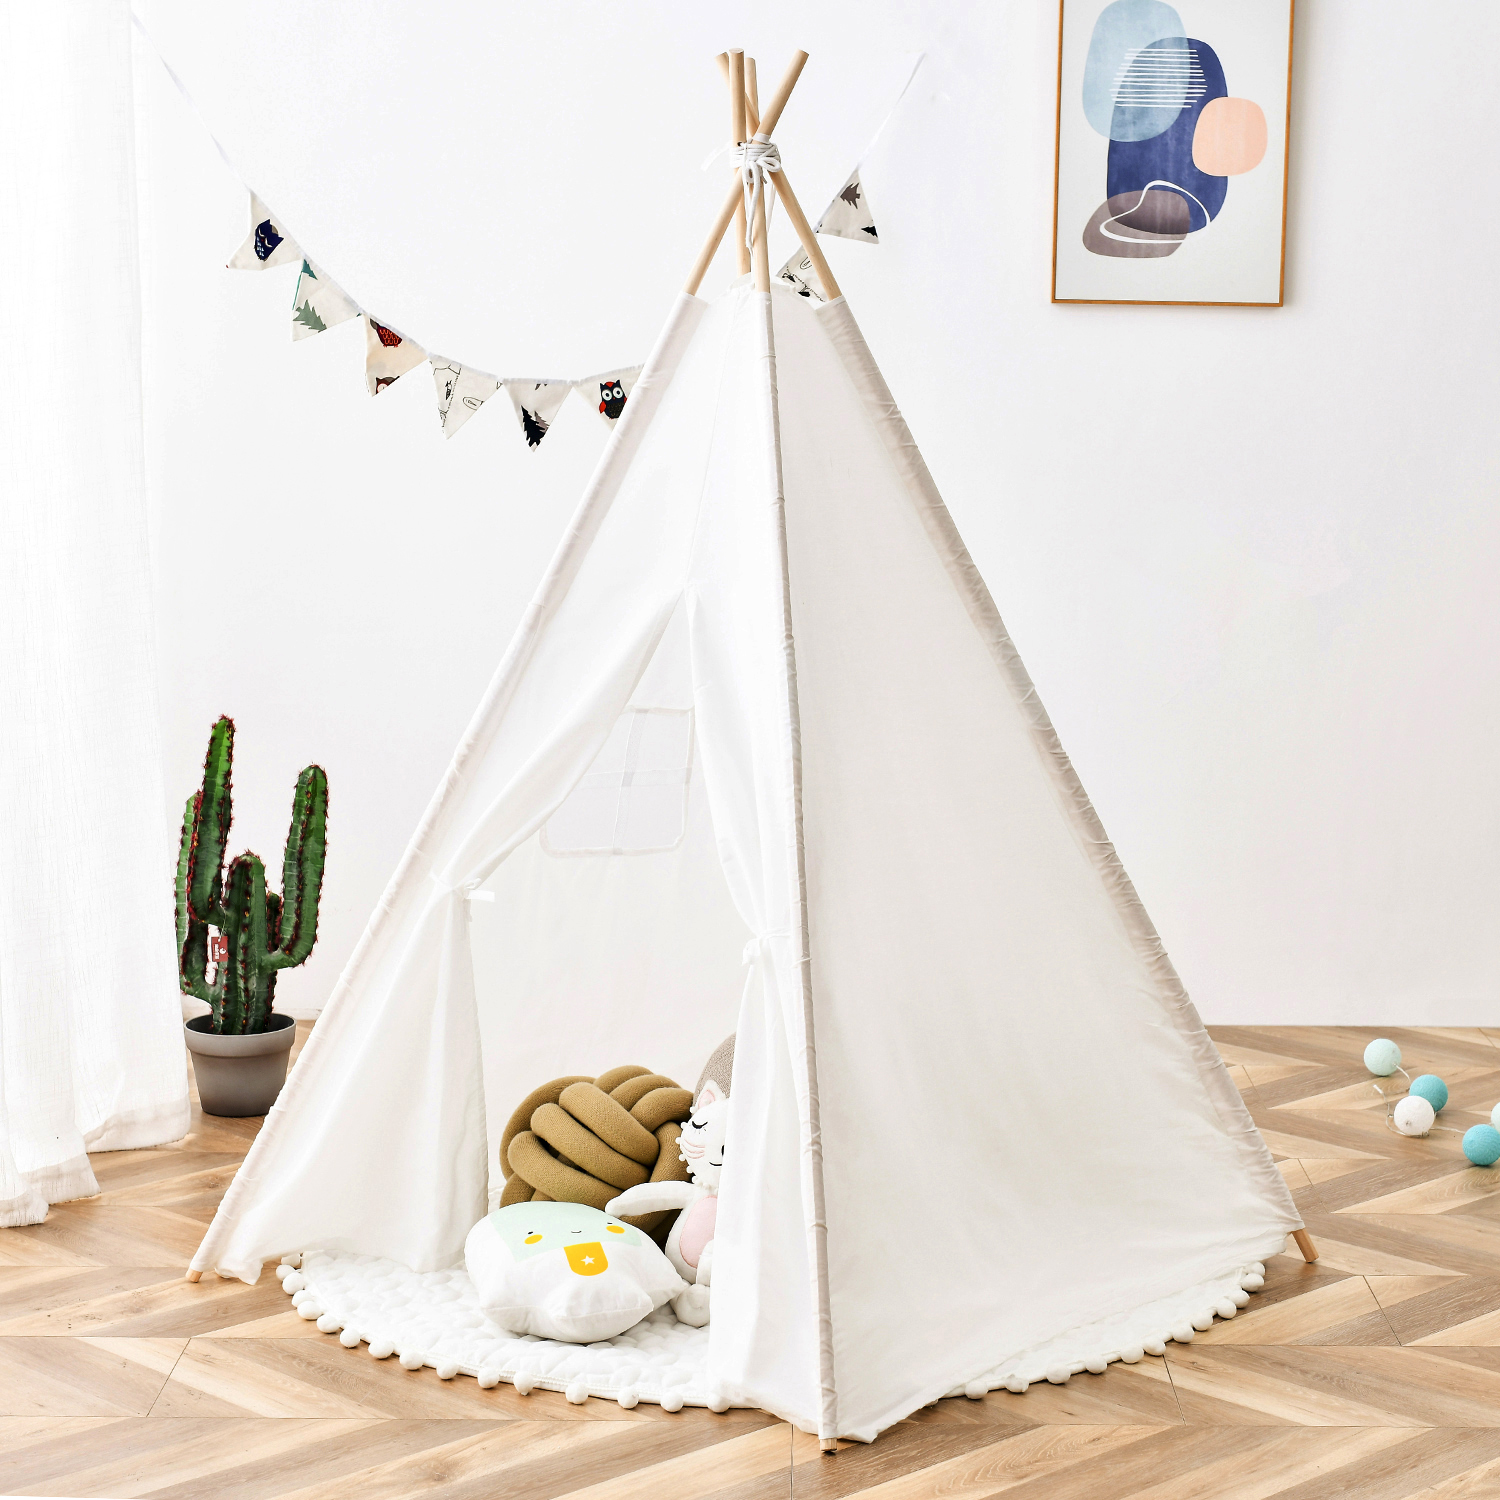 Kids Tent Natural Cotton Canvas Stable Framework Indoor Outdoor Safe Playing House Toys for Boy Girl-CASAINC